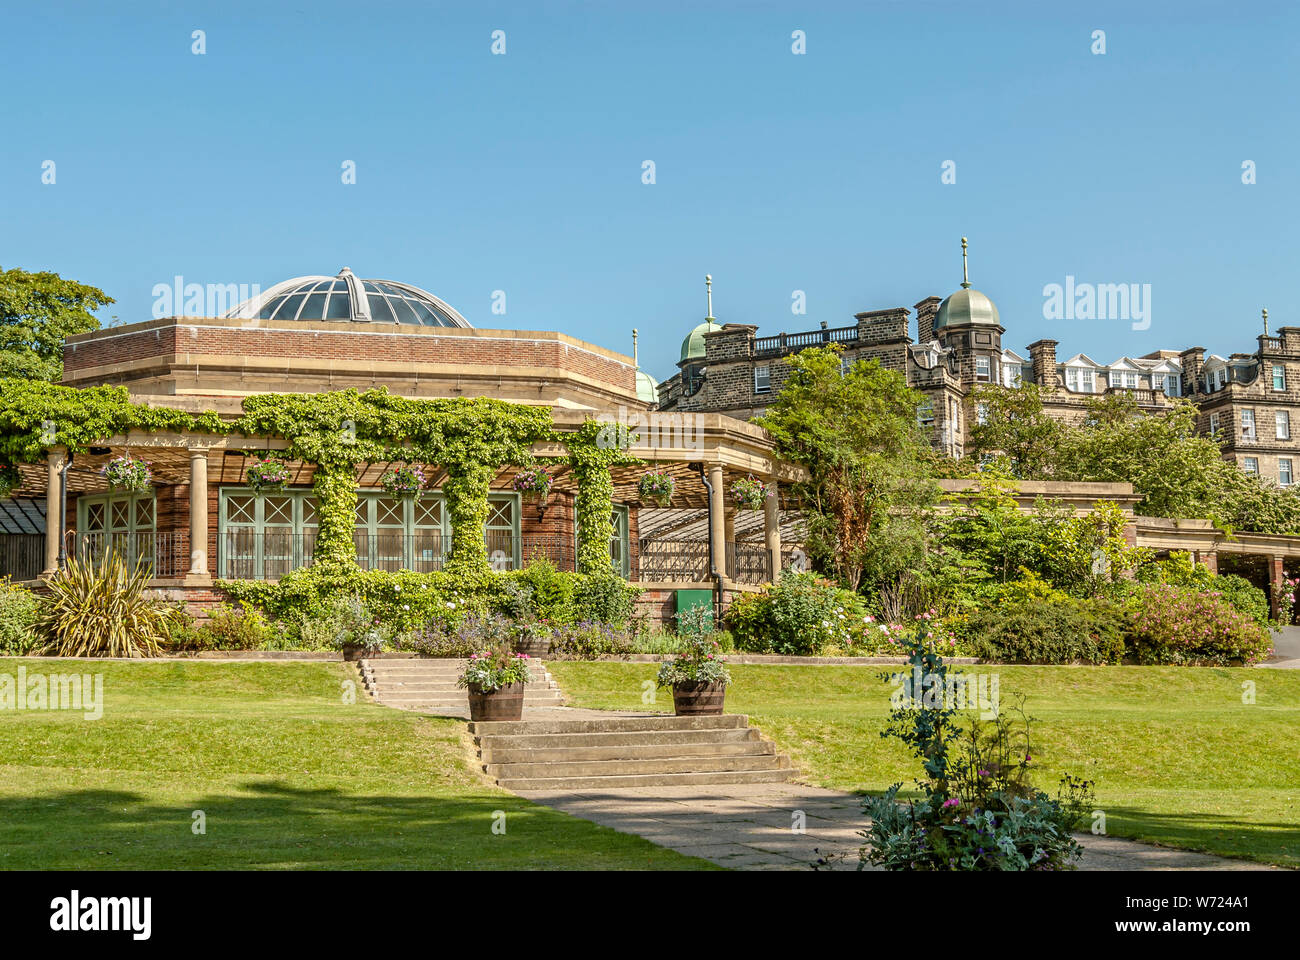 Sun Pavilion at the Valley Gardens in Harrogate (or Harrogate Spa) a spa town in North Yorkshire, England. Stock Photo